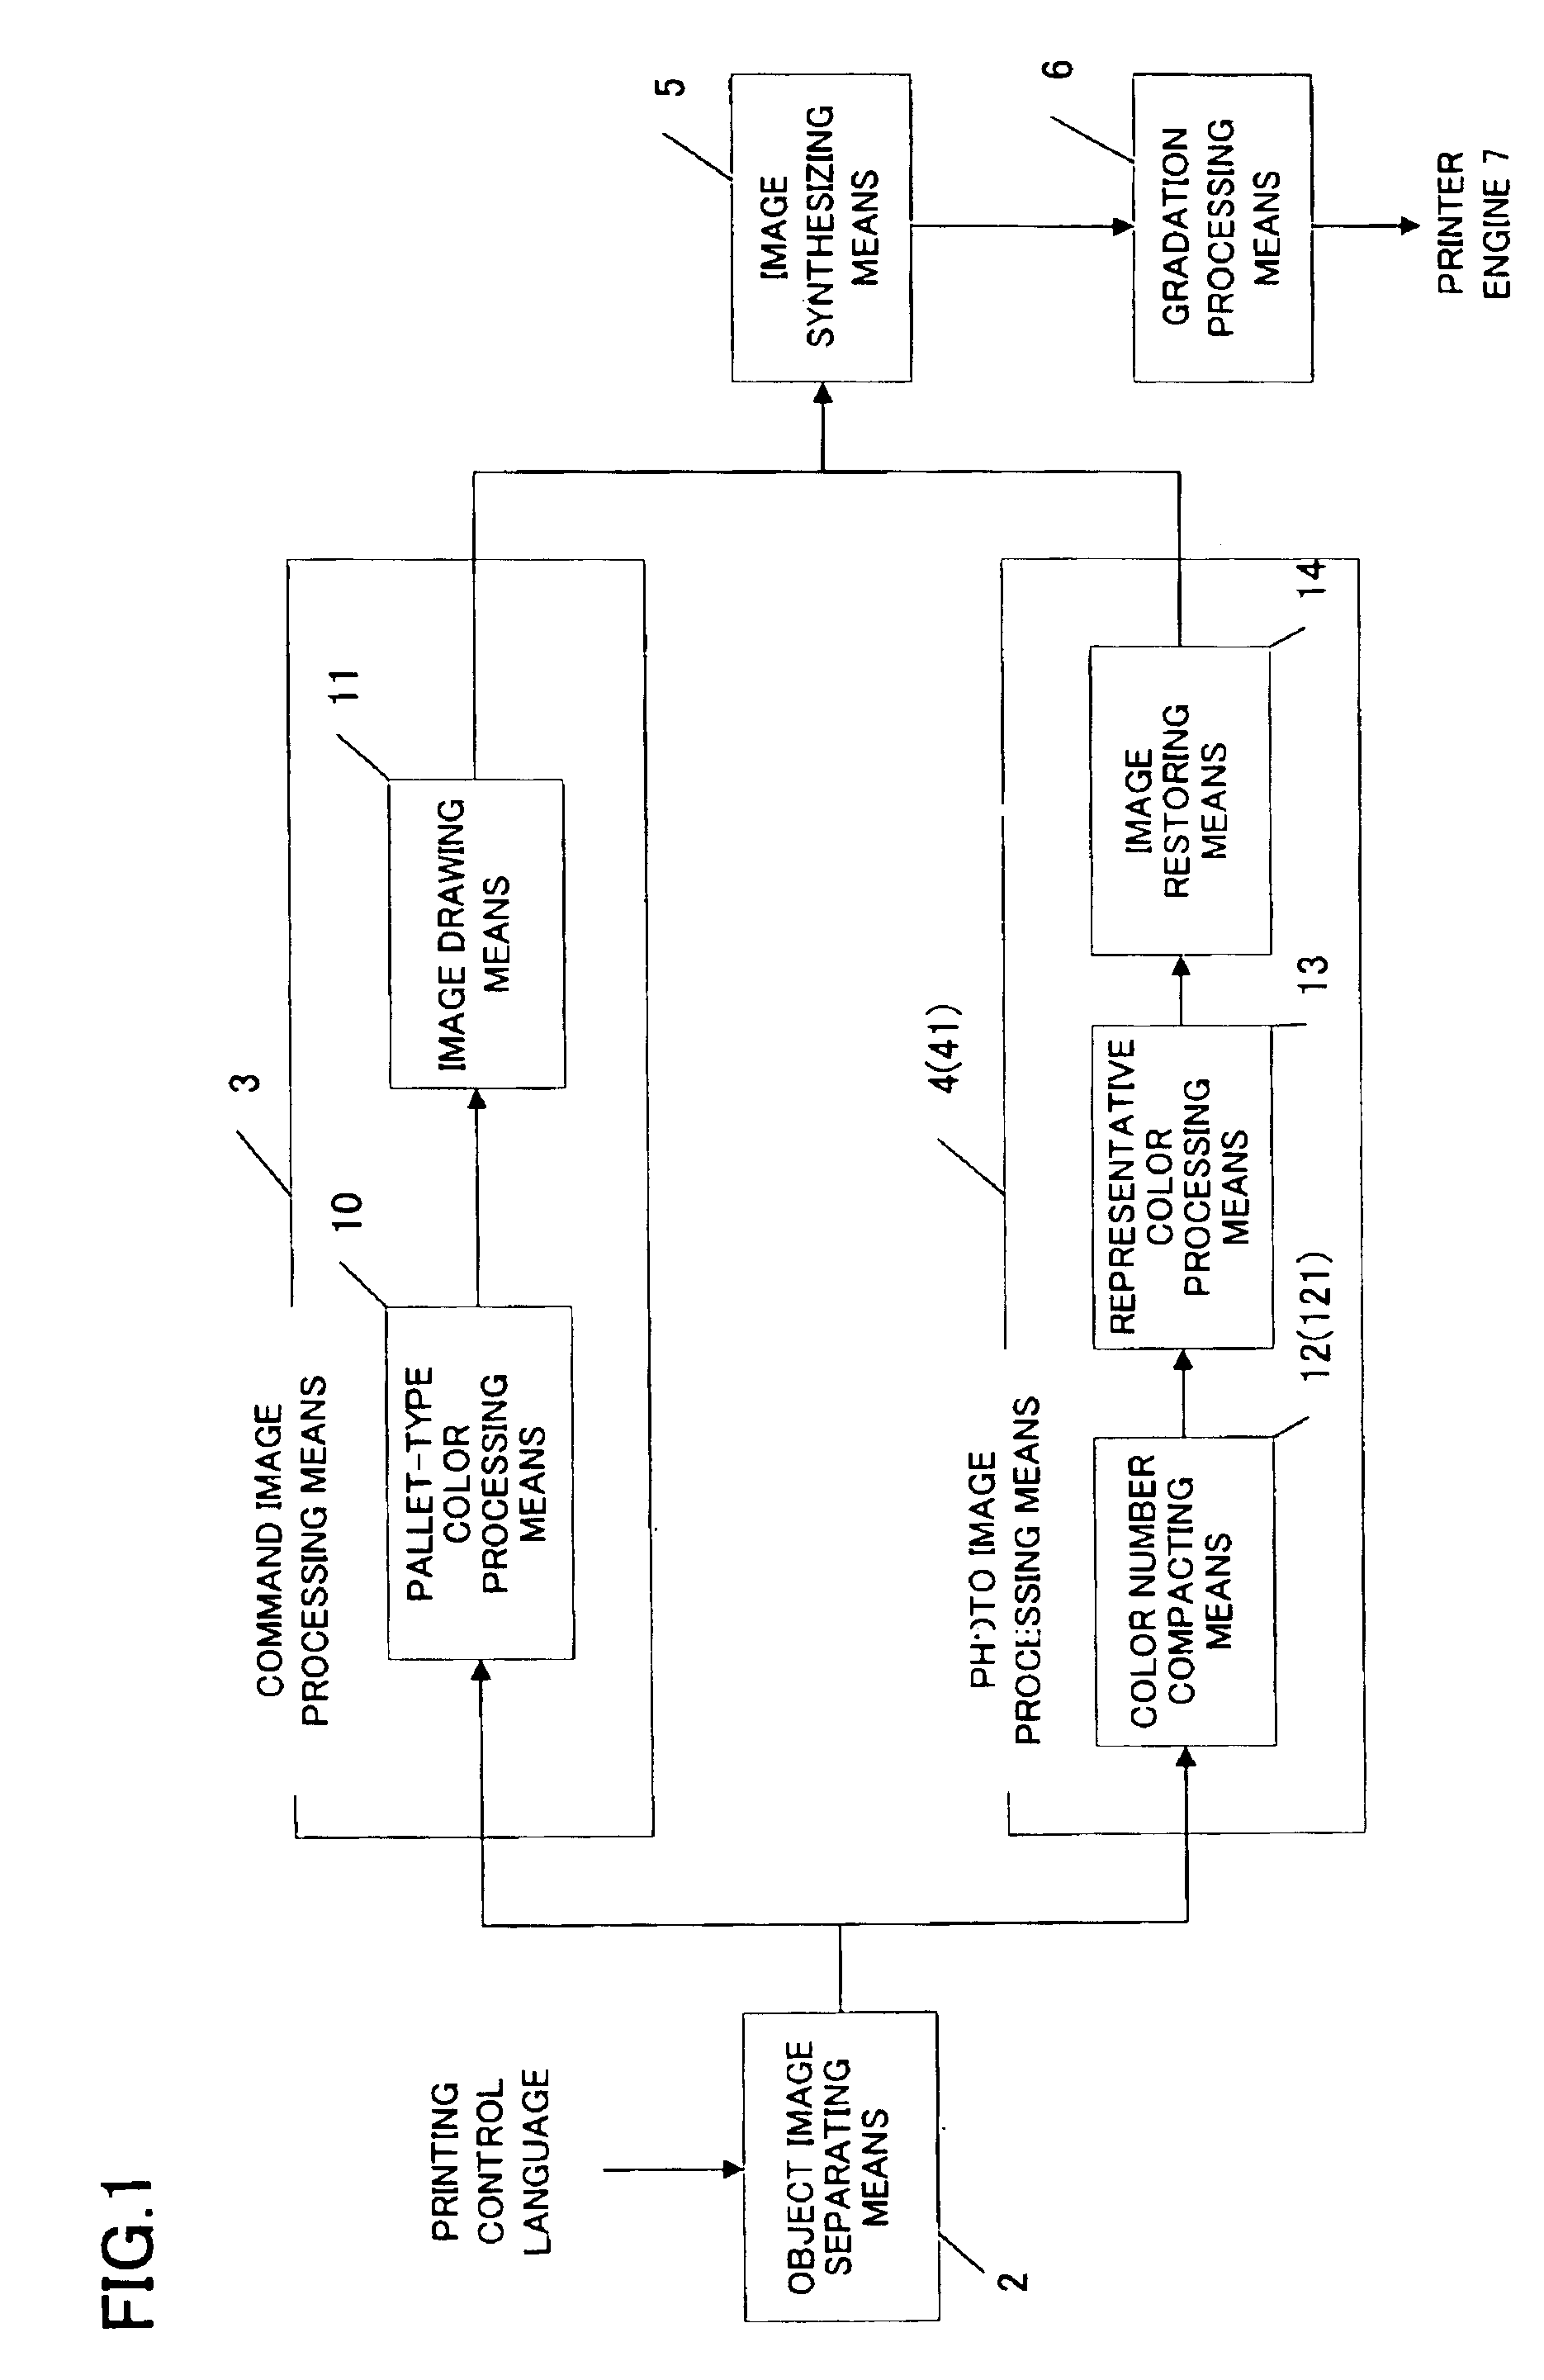 Image processing apparatus, image processing method and recording medium with color image compacting